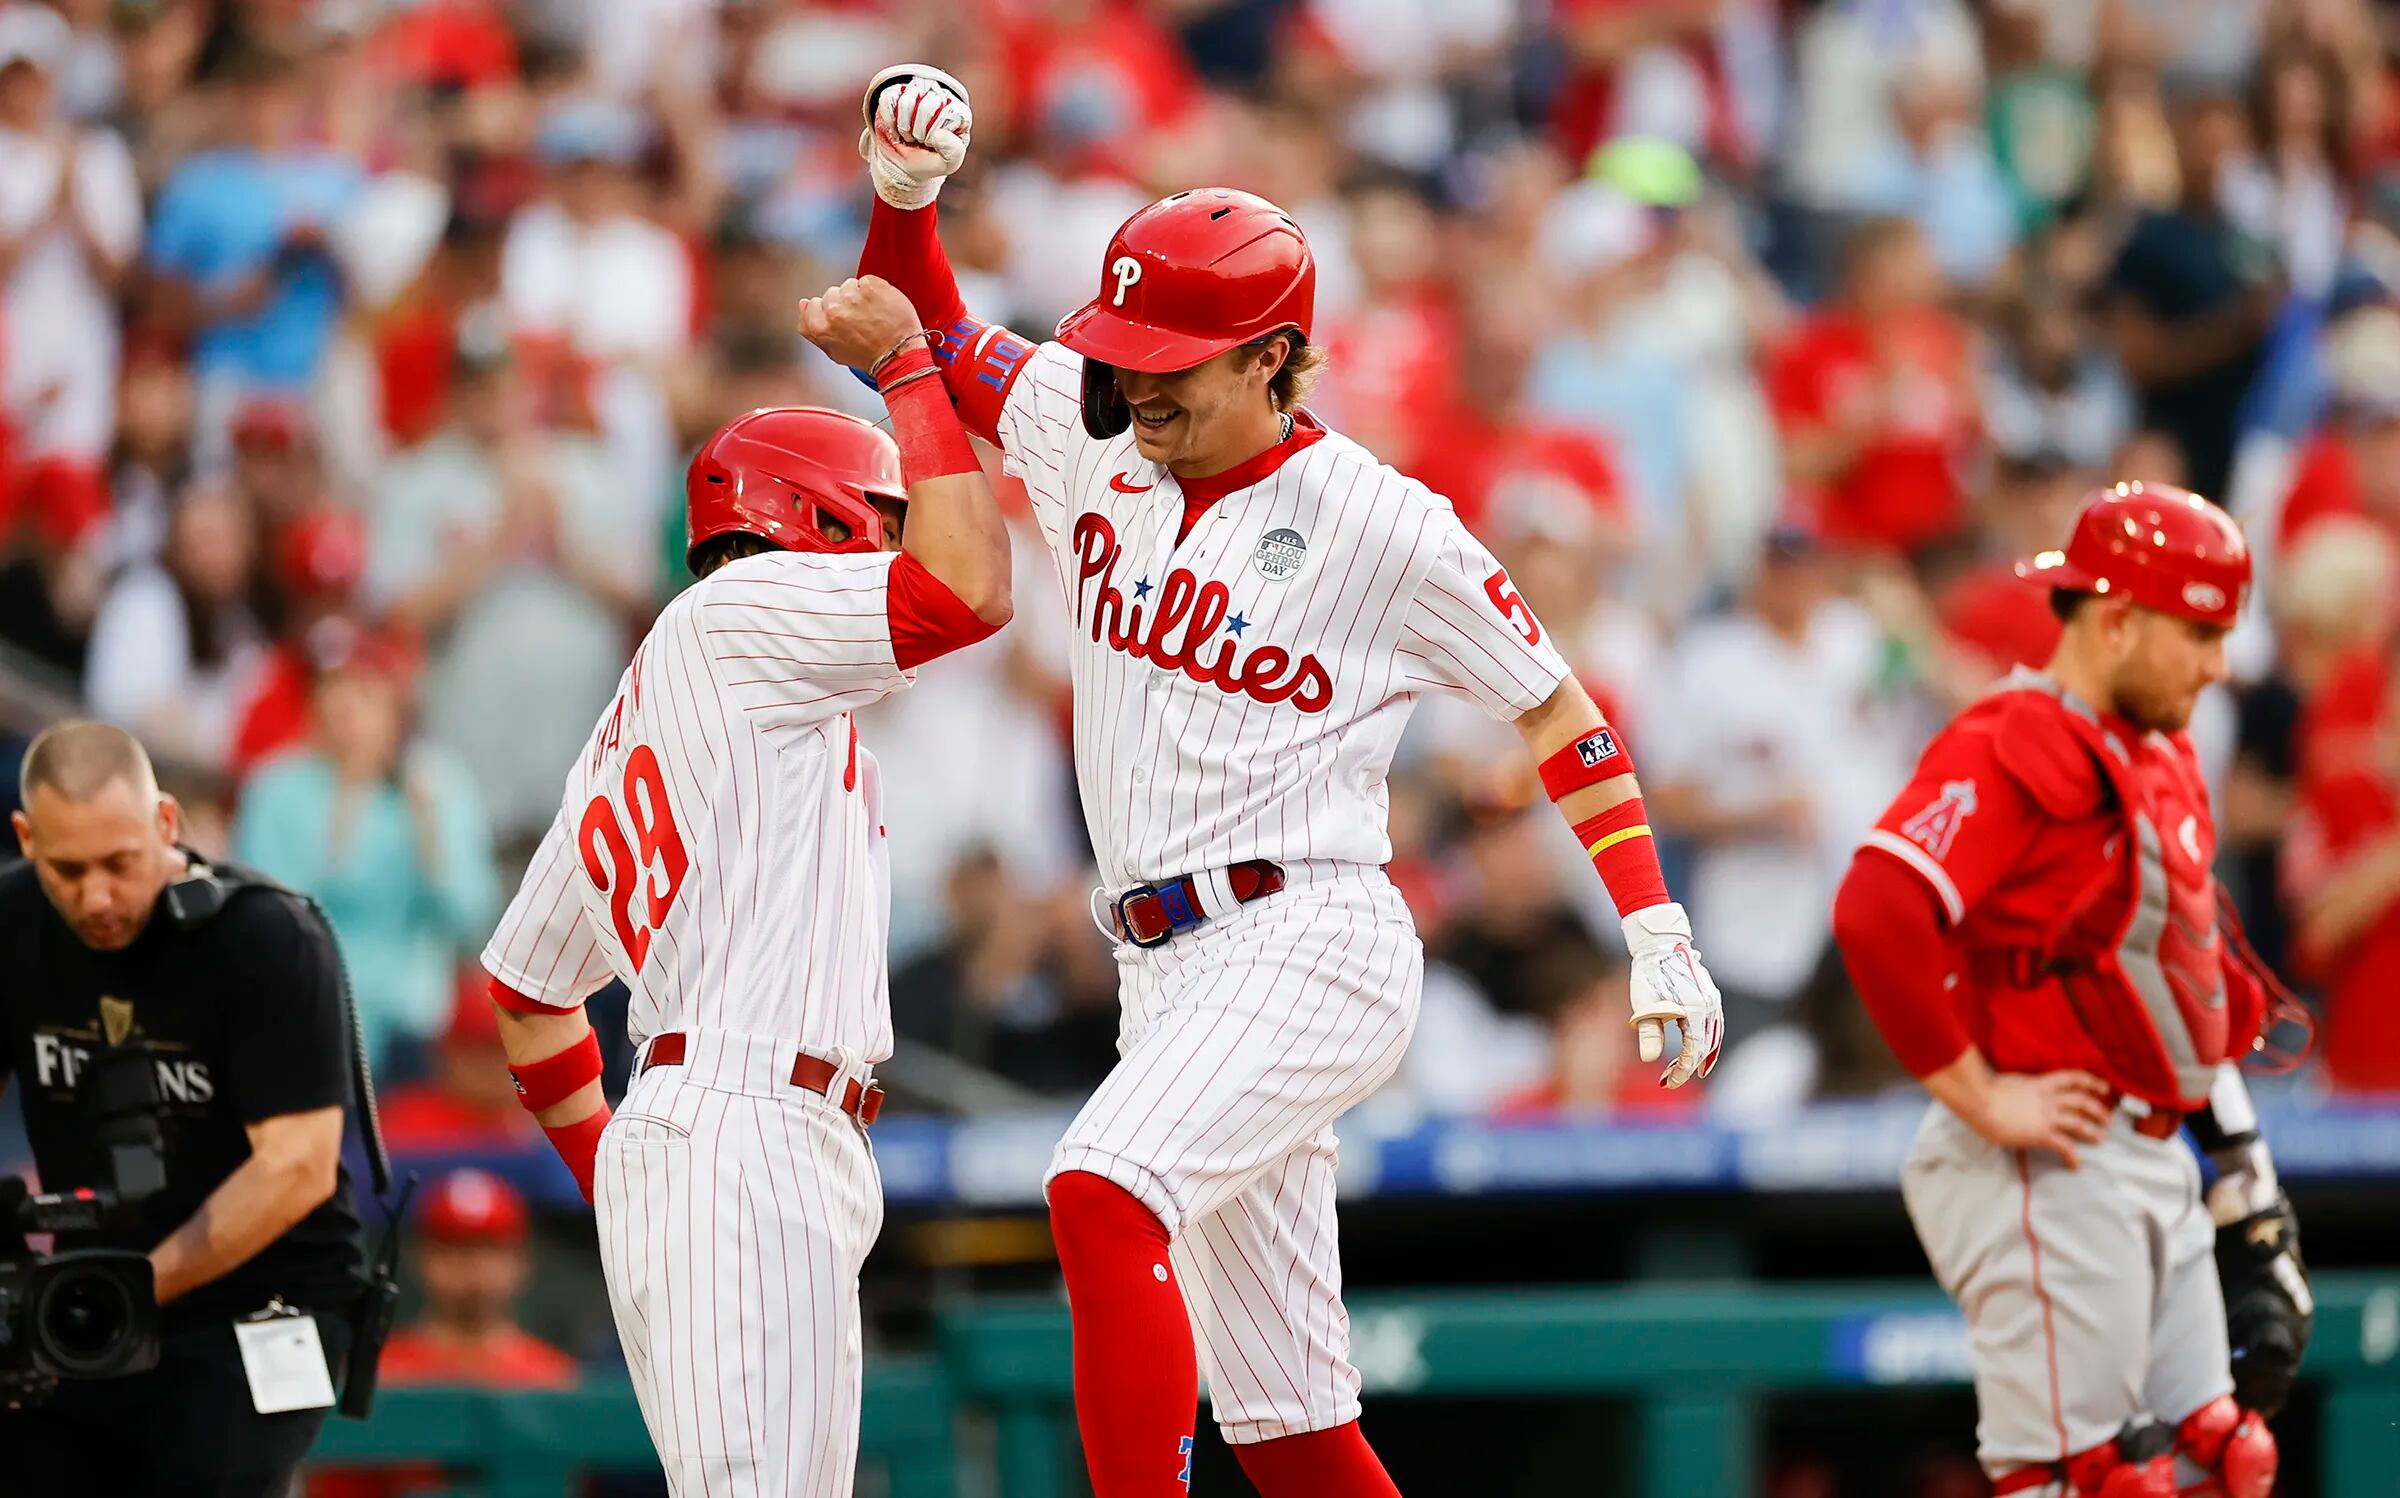 Phillies trademark iconic Bedlam at the Bank call